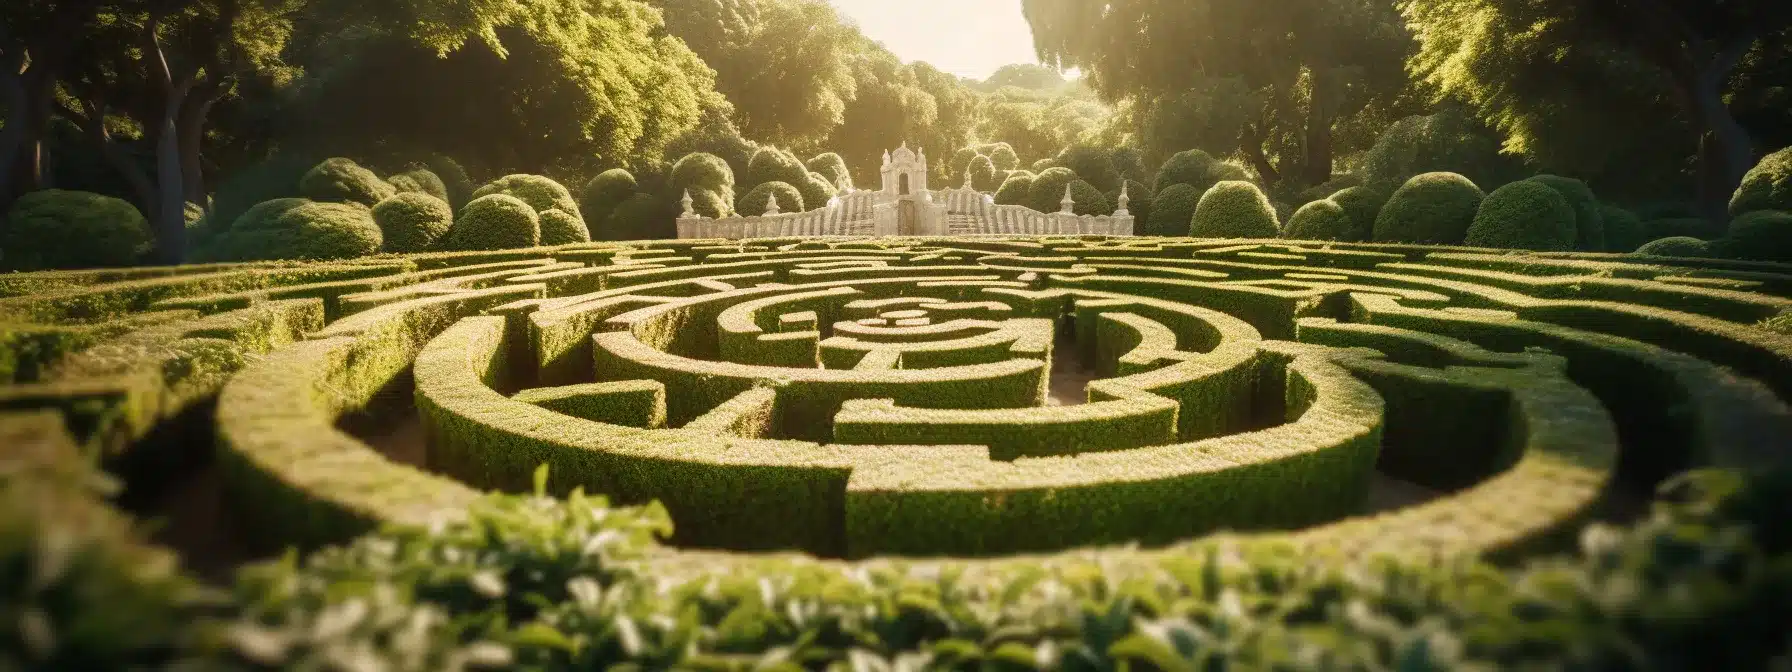 A Winding Maze In A Garden, Full Of Twists And Turns, Representing The Challenges Of Achieving Brand Consistency.